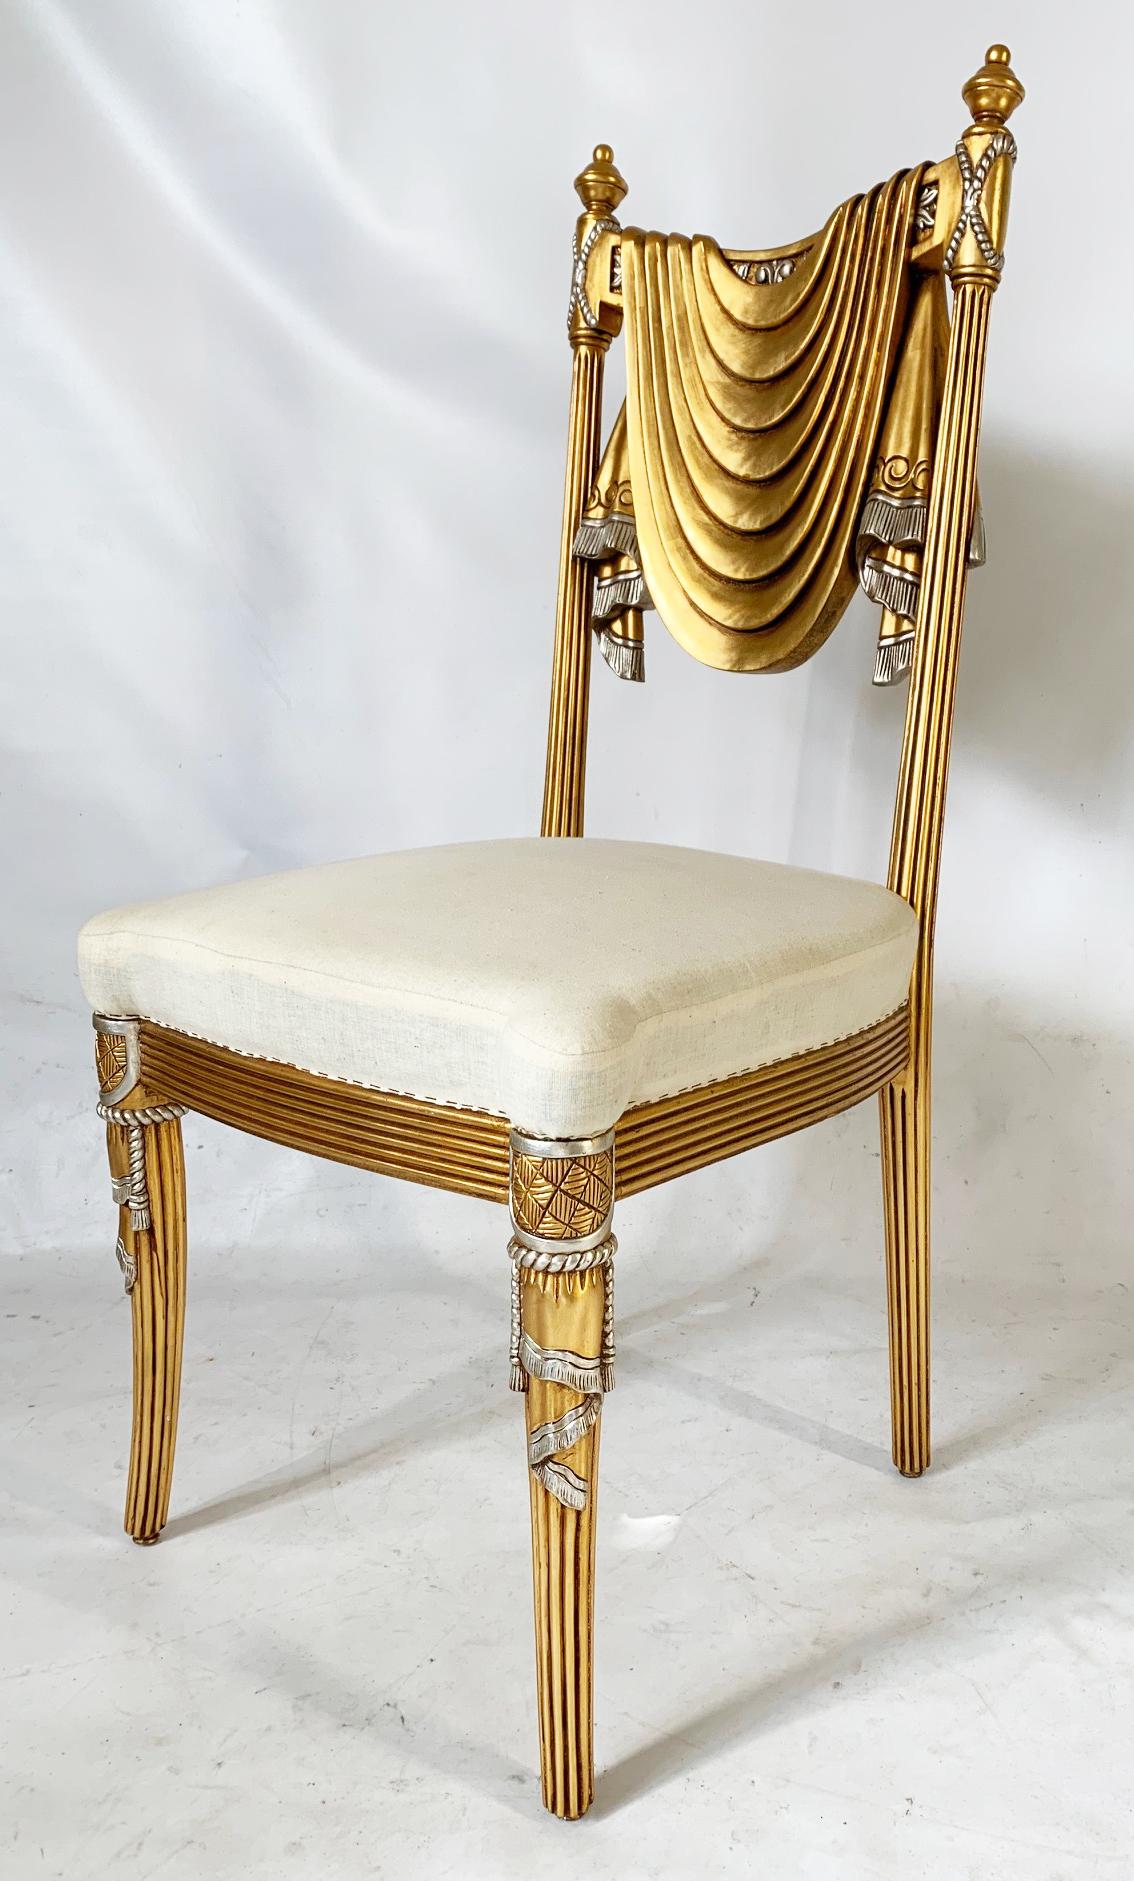 Hand carved dining chairs feature swag back motif in the form of draped fabric with tassel accents. Hand carved in Syria. Bright gold finish.  Two other finishes available, antique gold and brown stain (inquire if interested). Seats are ready for